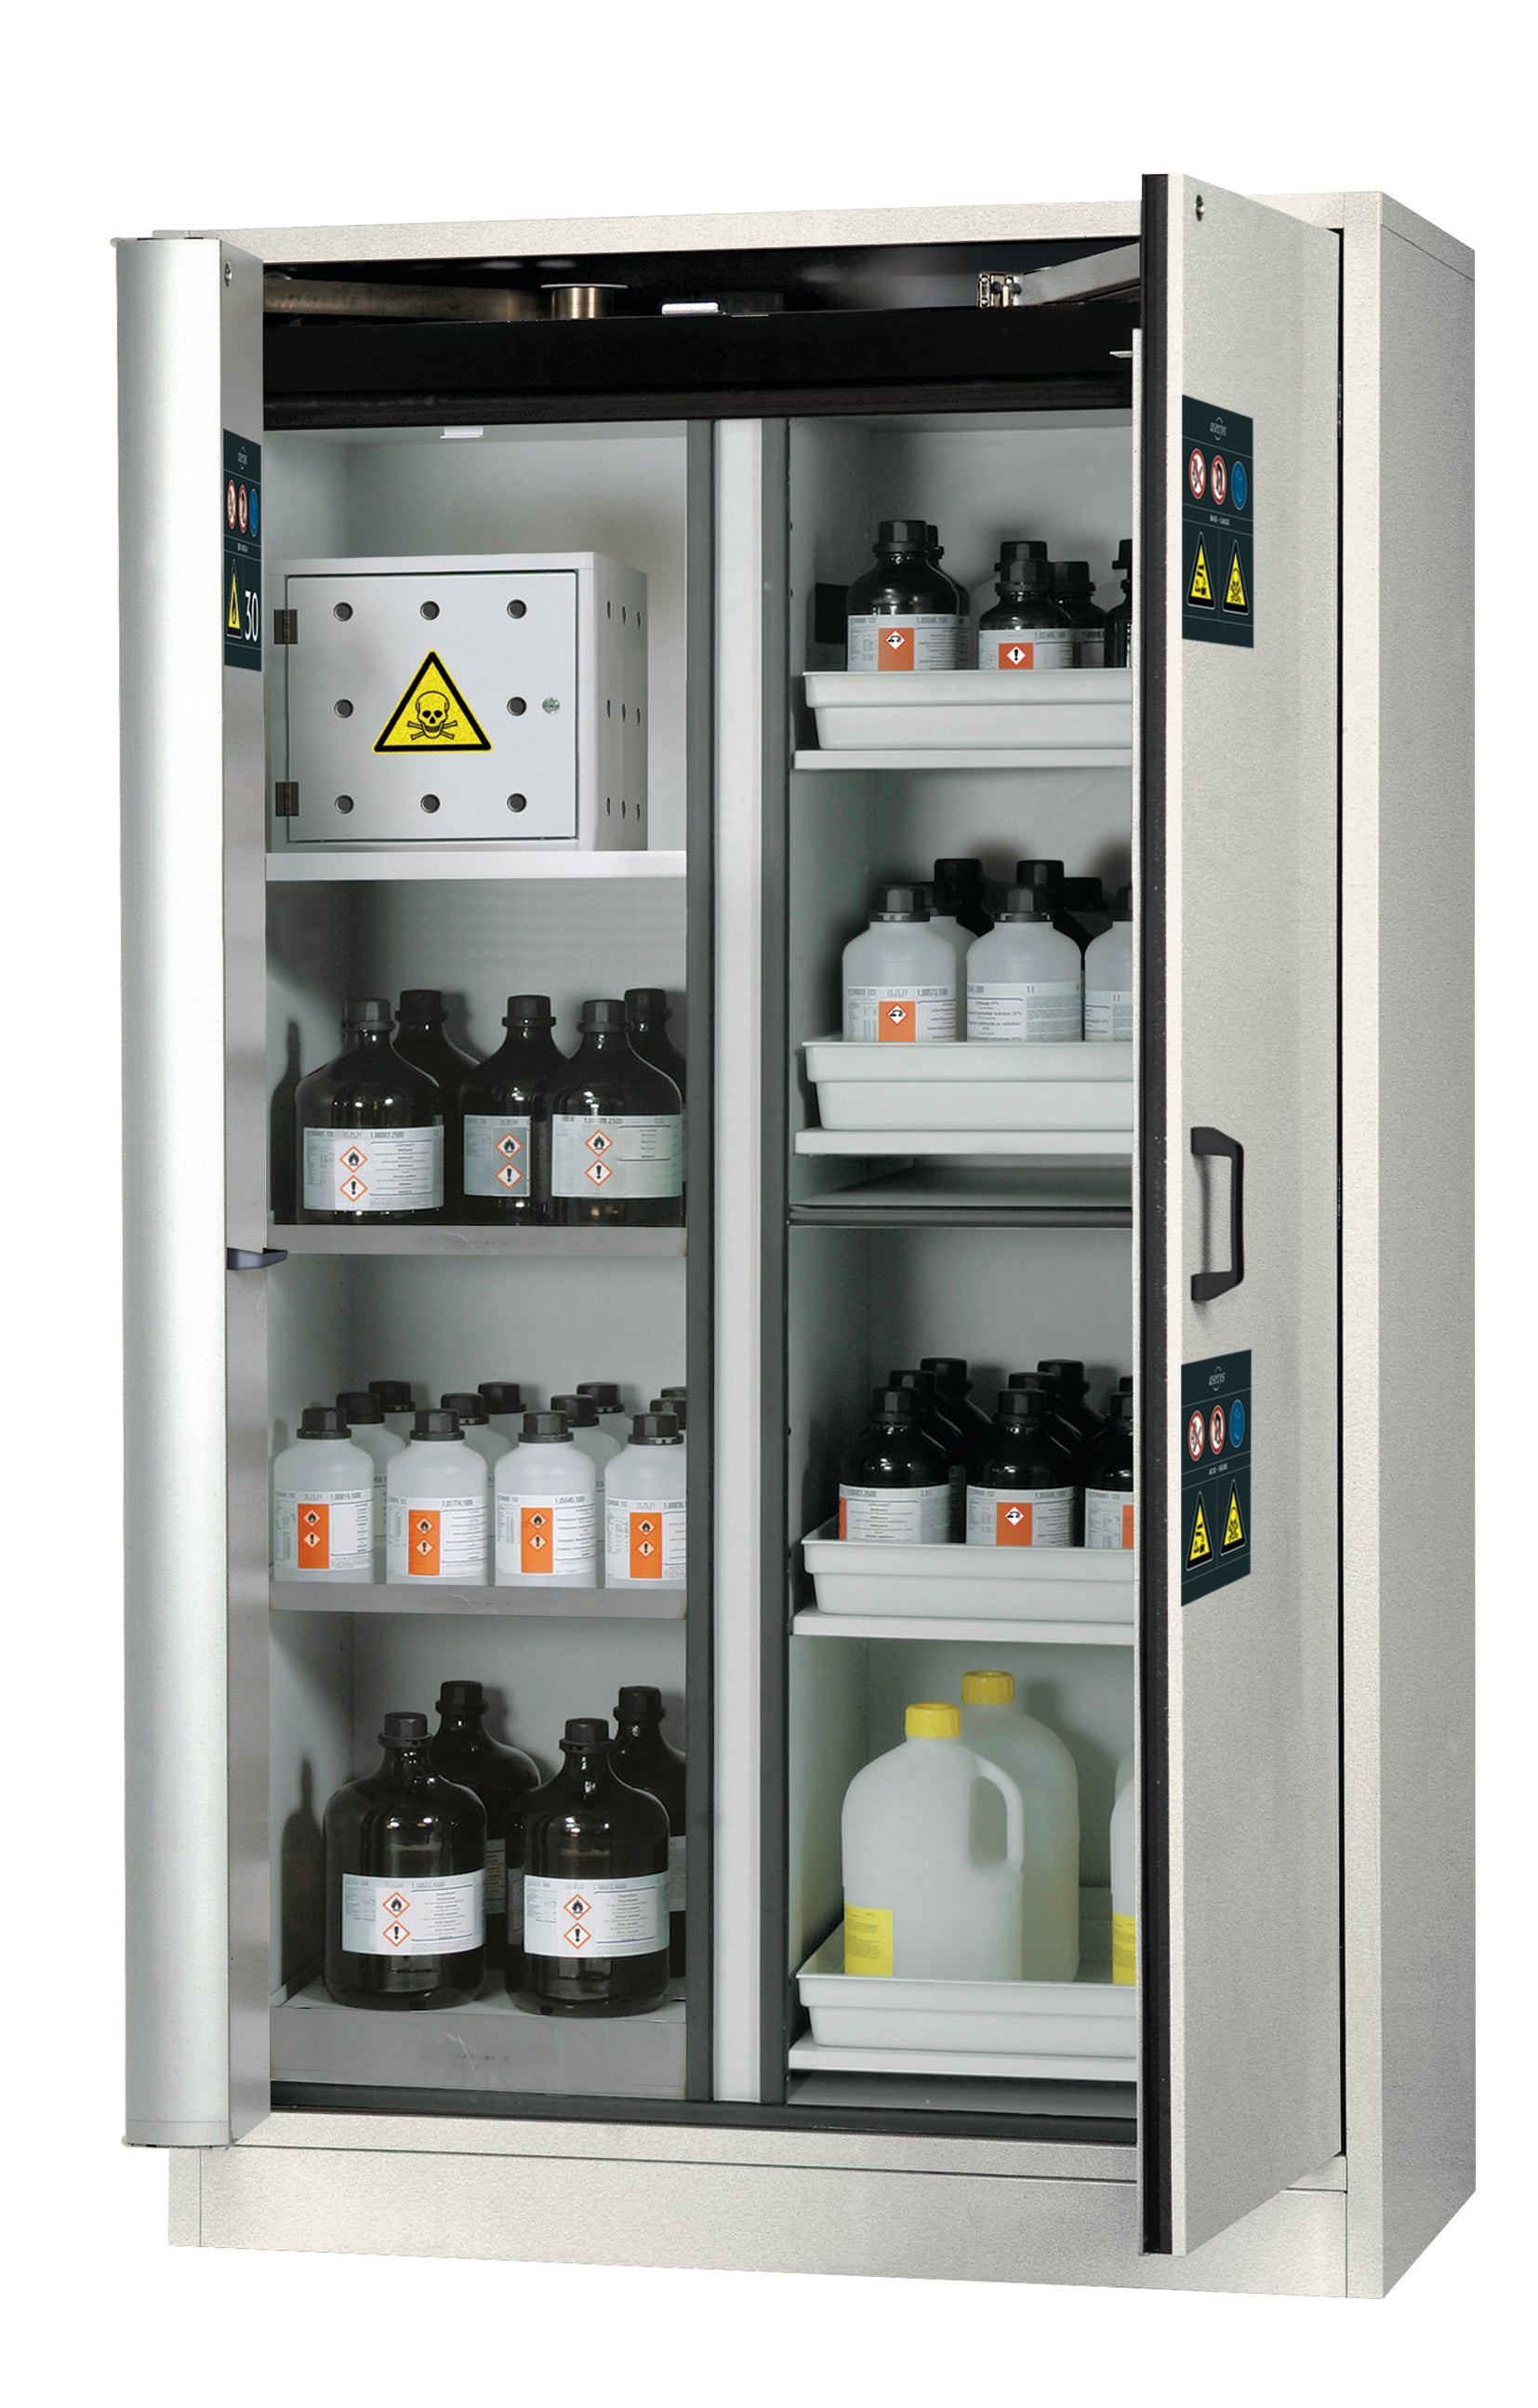 Type 30 combination safety cabinet K-PHOENIX-30 model K30.197.120.MC.FWAS in light gray RAL 7035 with 2x standard shelves (stainless steel 1.4301)